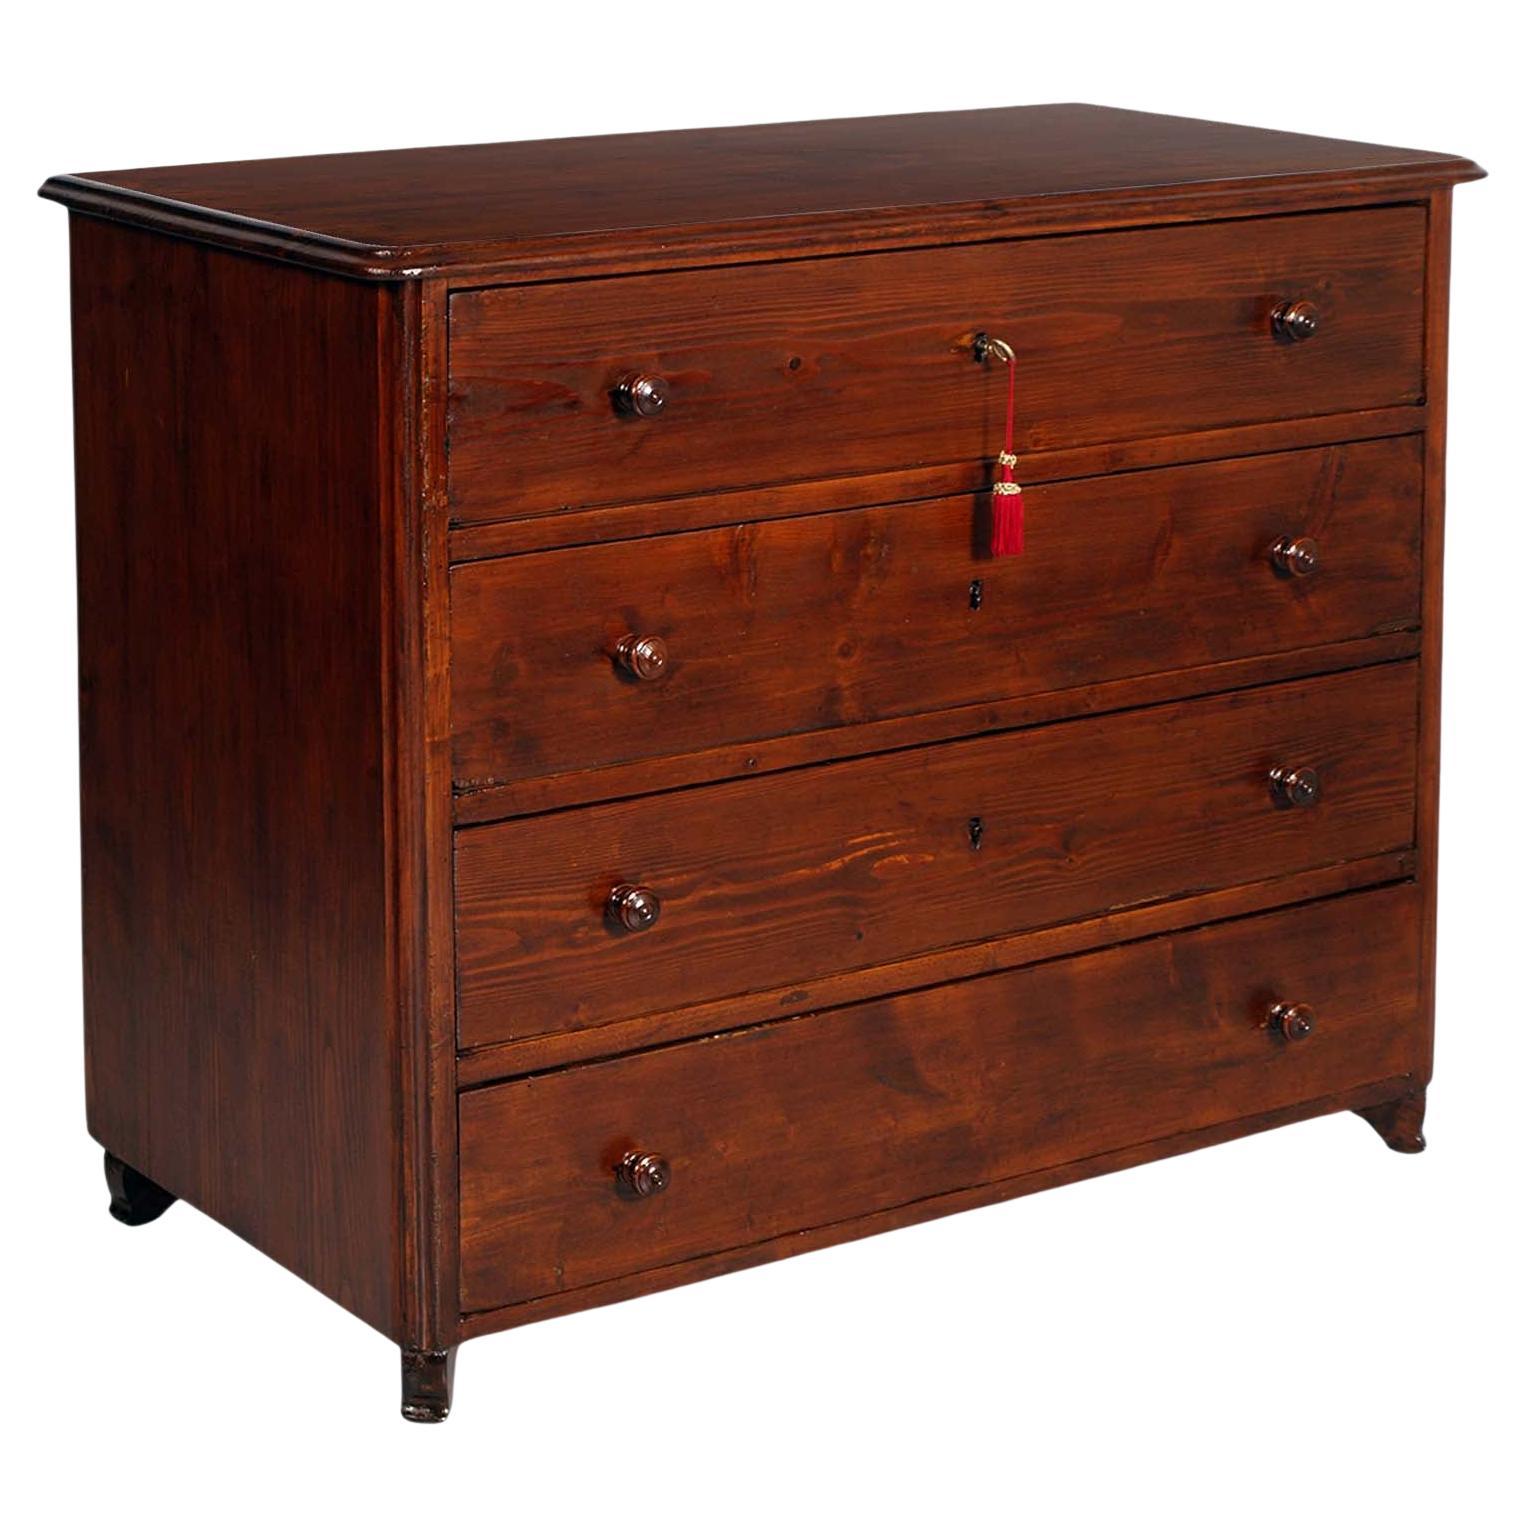 18th Century Original Venetian Country Dresser in Larch, Restored Wax Polished